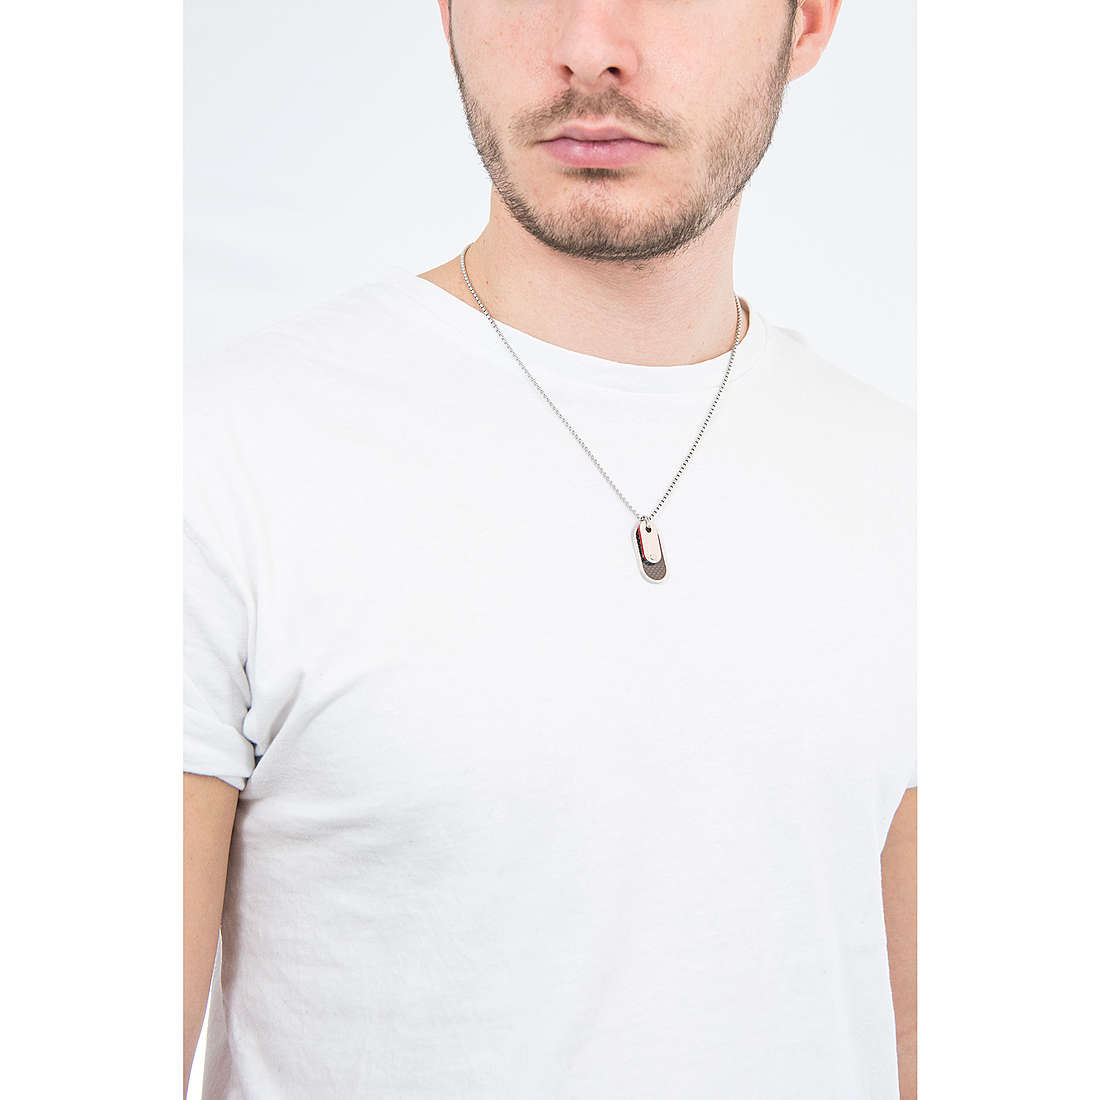 Sector necklaces No Limits man SARH01 wearing